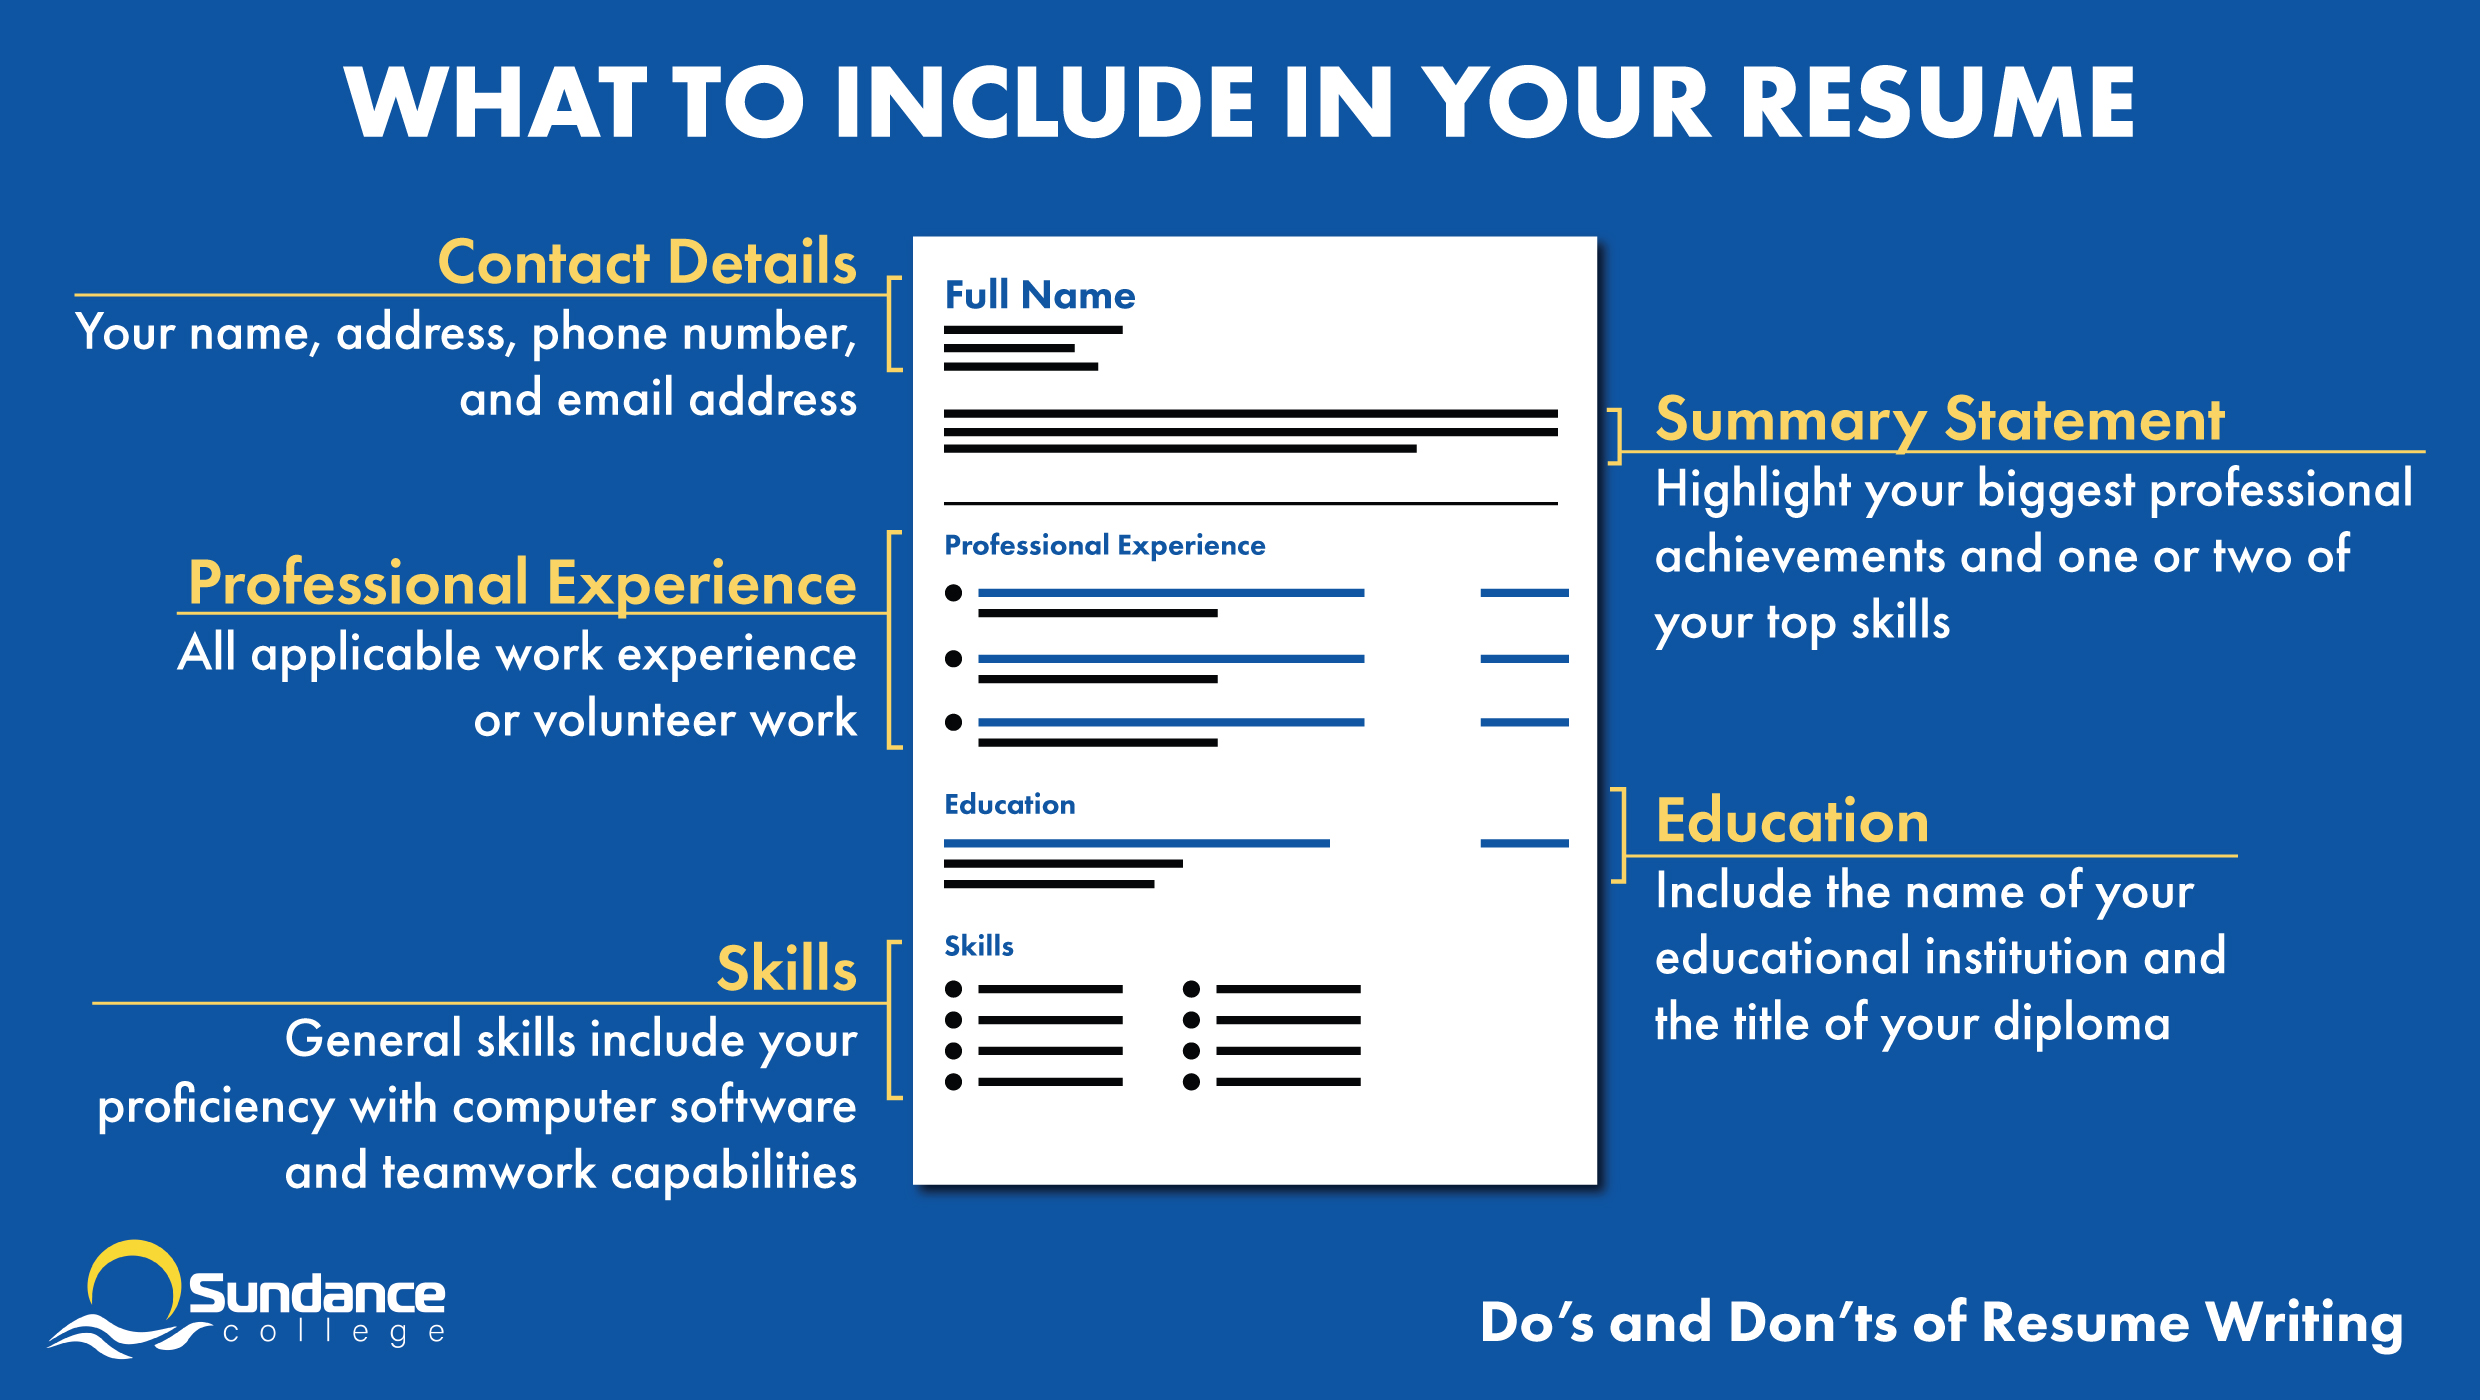 Infographic detailing what to include in your resume, including contact details, summary statement, professional experience, education, and skills - as part of the do's of resume writing